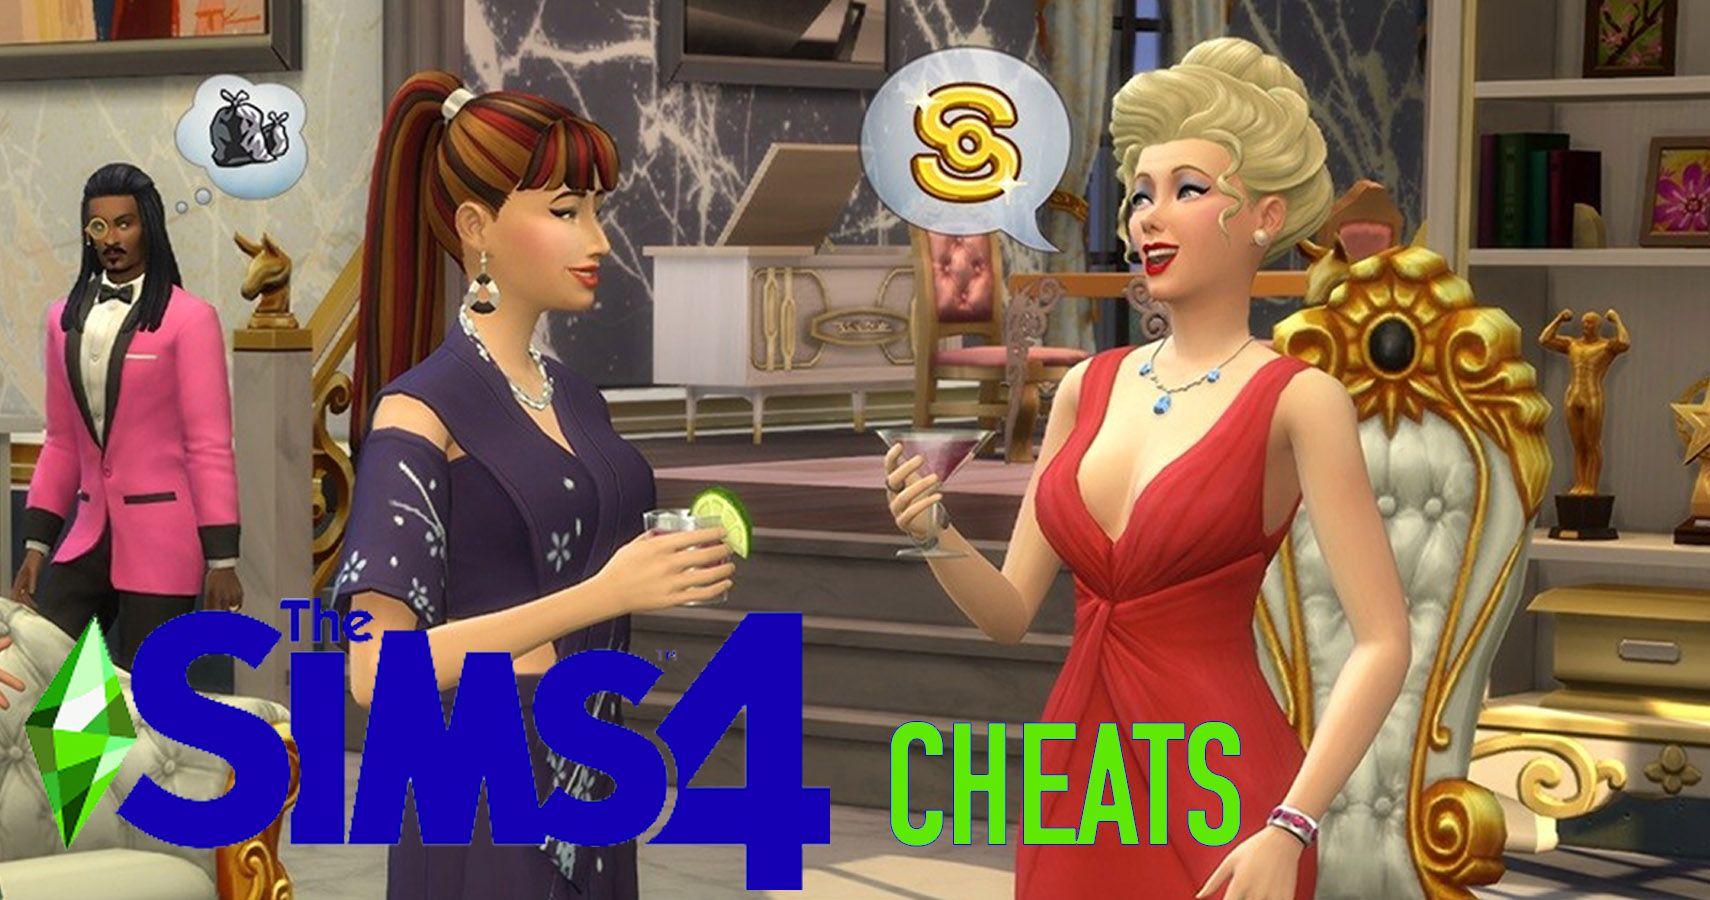 cheats enabled sims 4